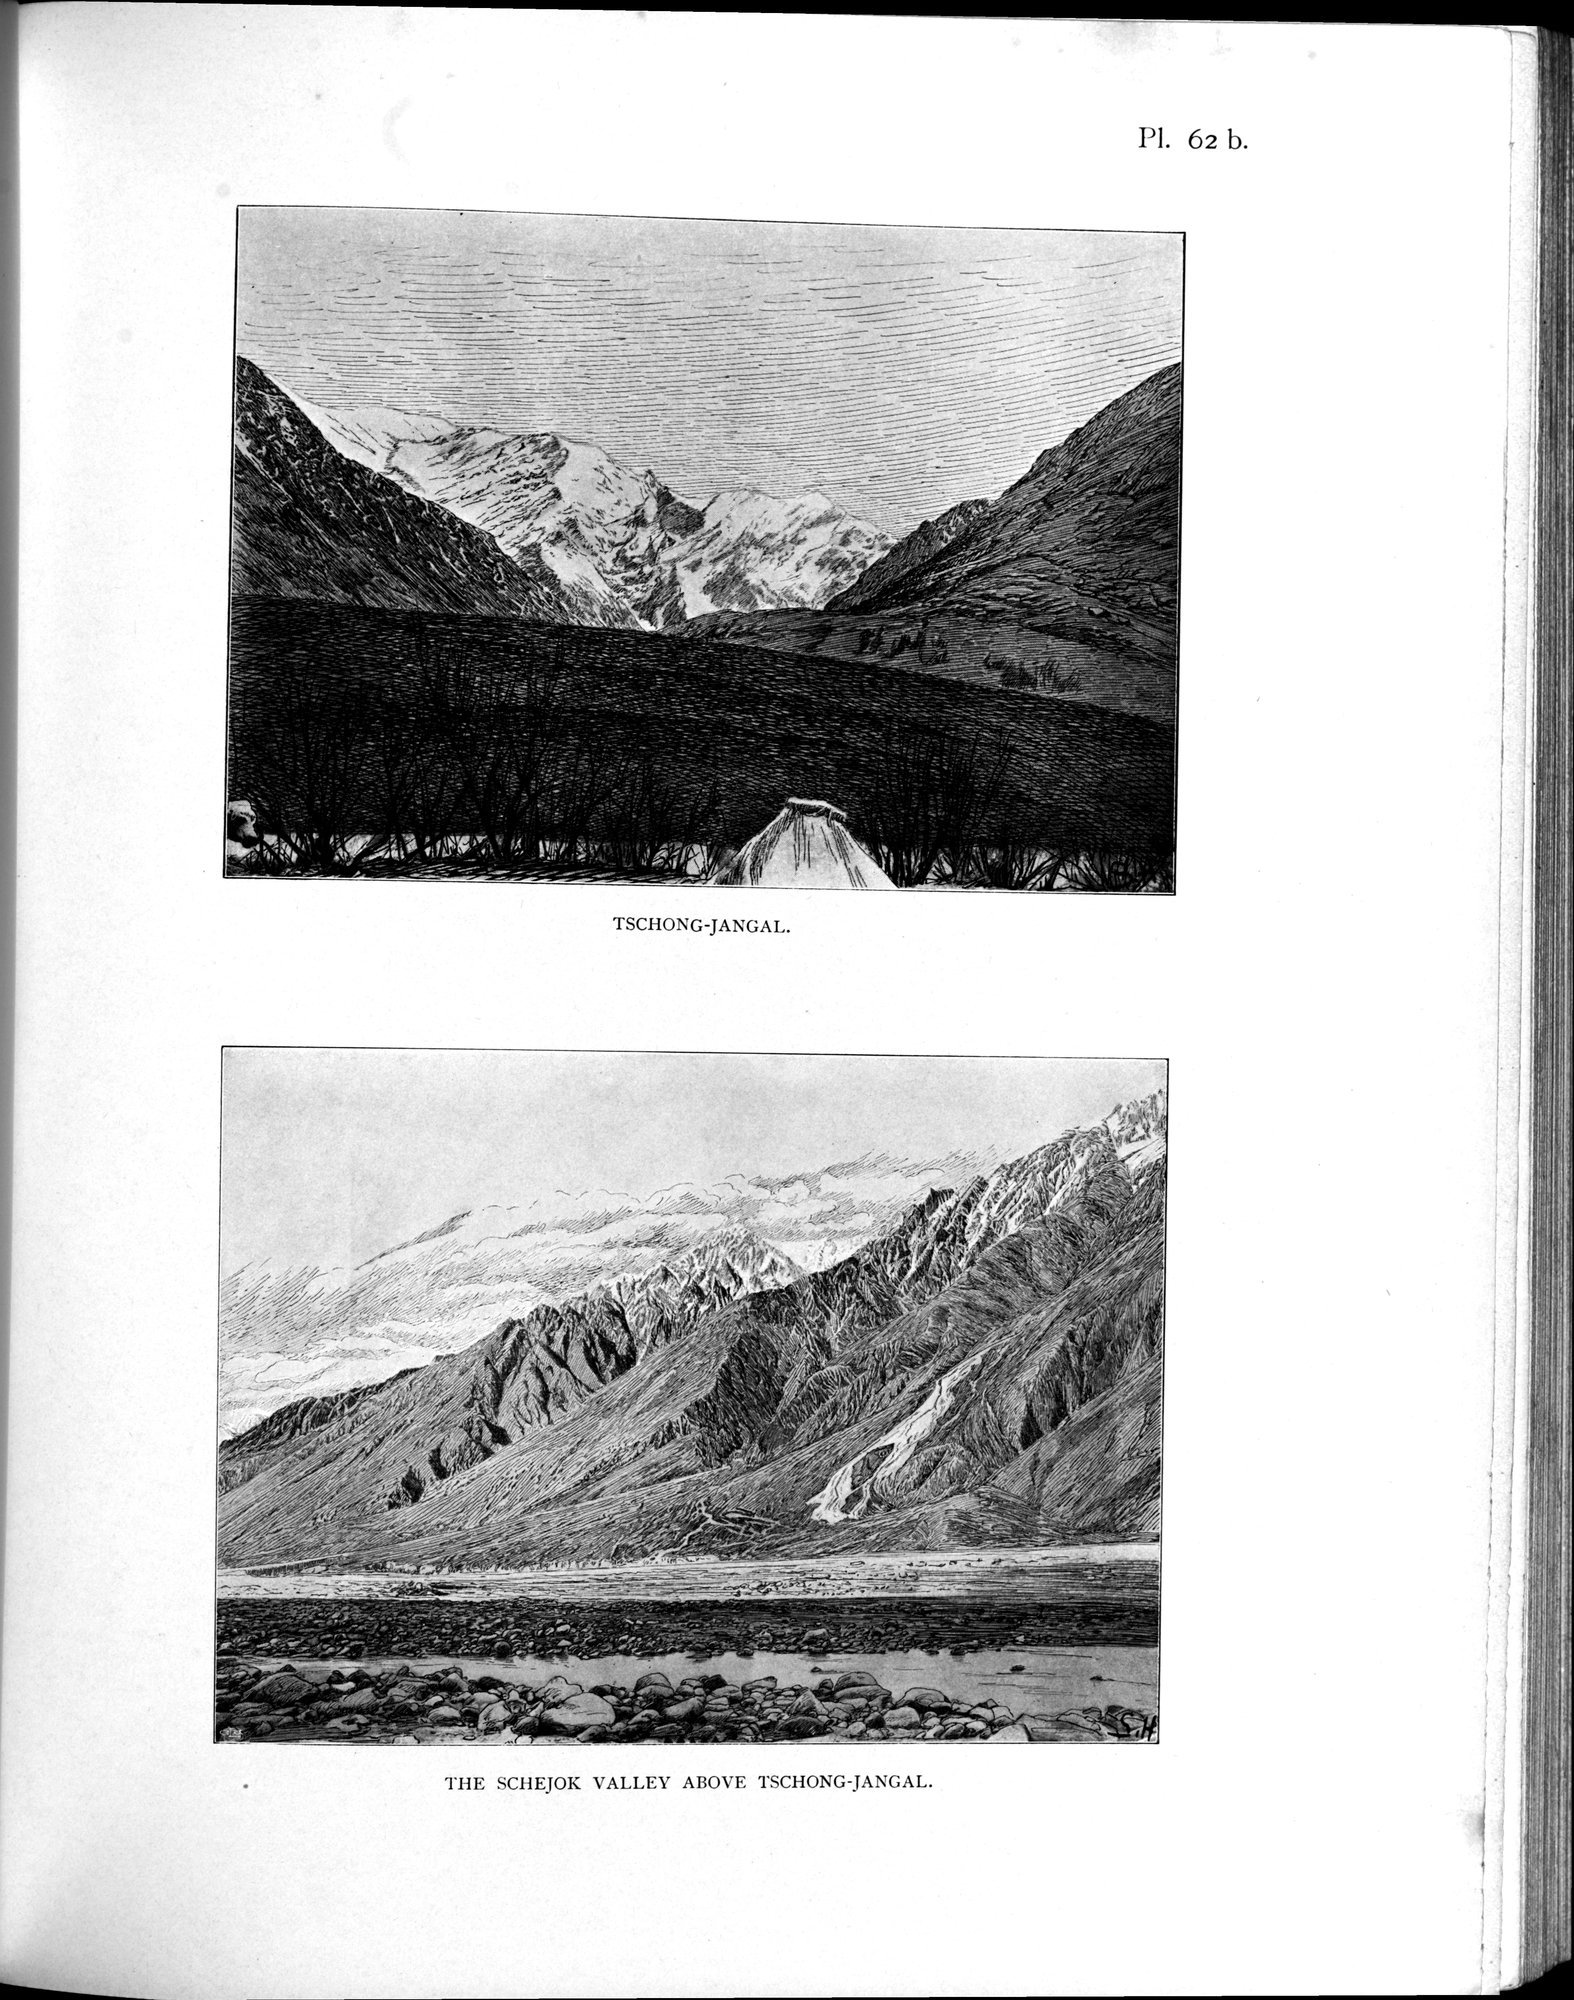 Scientific Results of a Journey in Central Asia, 1899-1902 : vol.4 / 563 ページ（白黒高解像度画像）